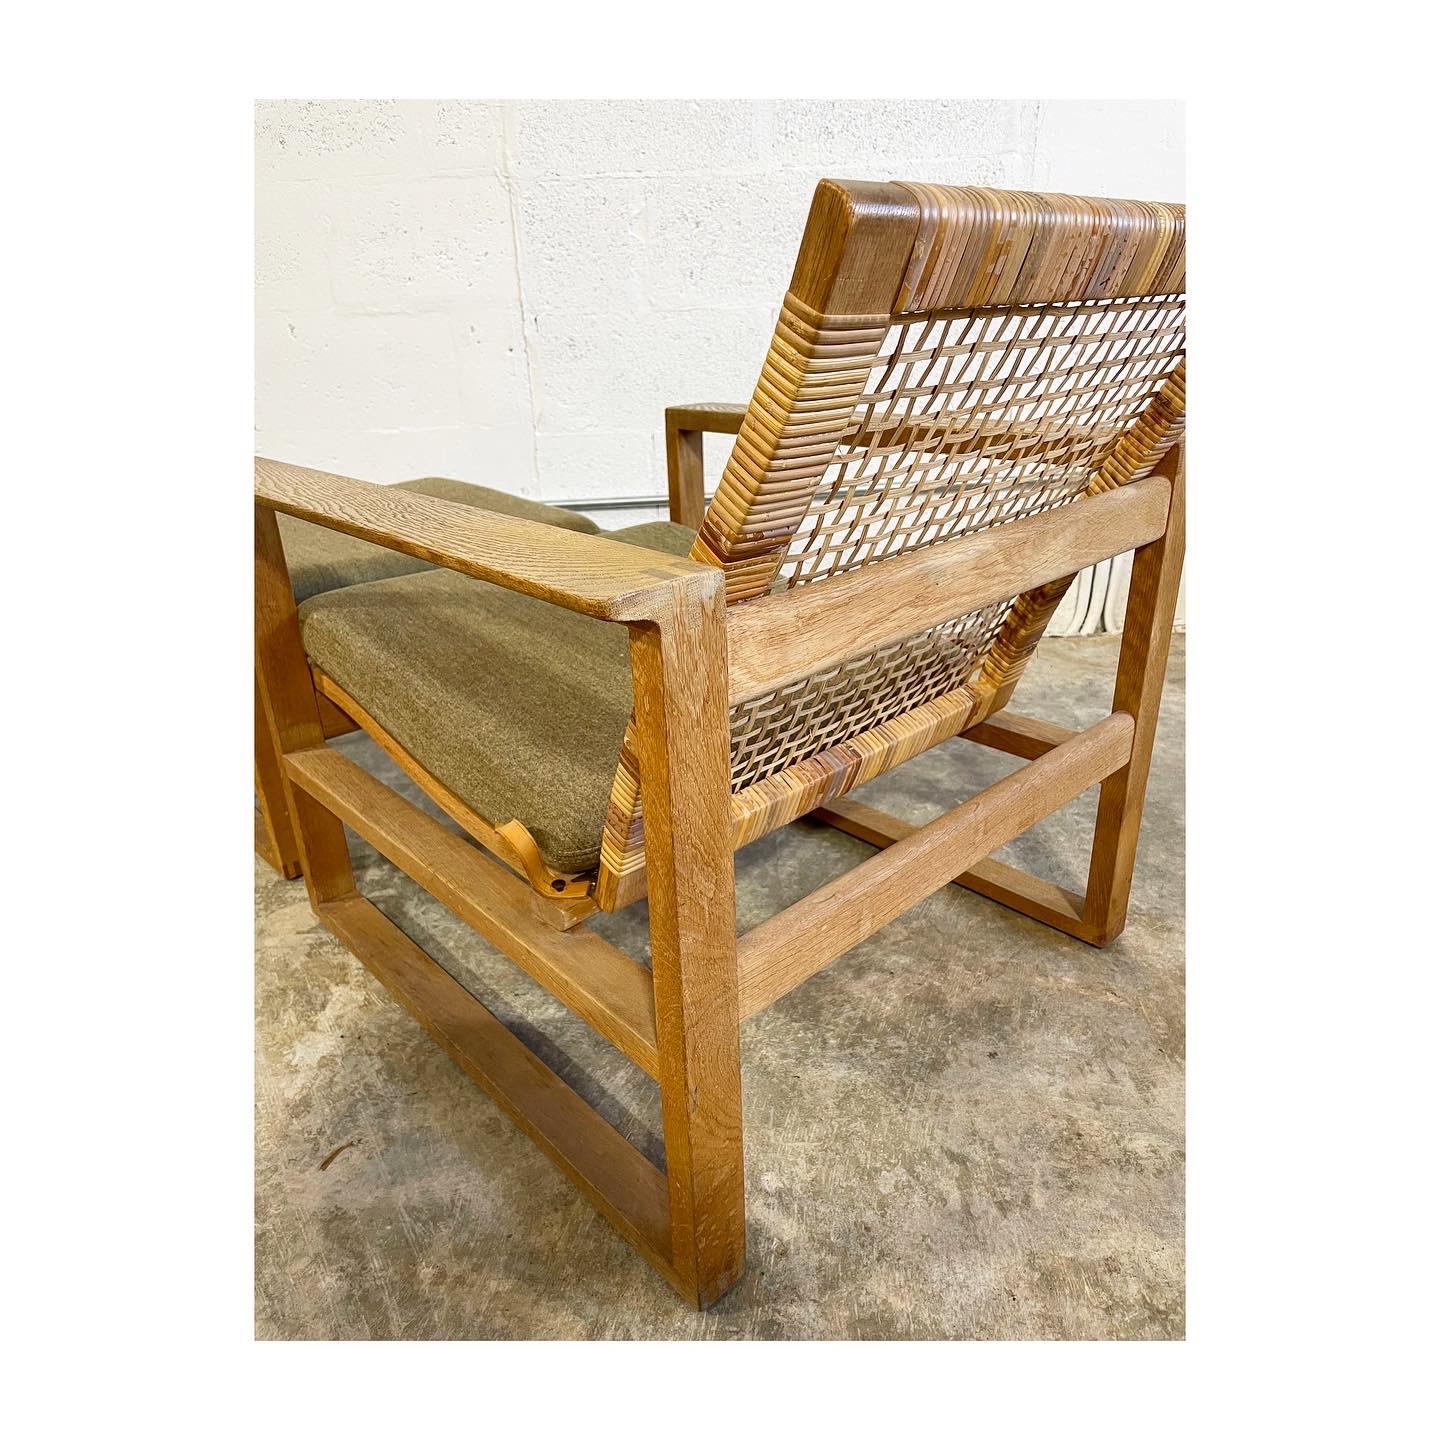 Børge Mogensen lounge chair and ottoman designed in 1956 model number 2254 for Fredericia Stolefabrik. Frame made of solid oak with finger joints and cane. Labeled.